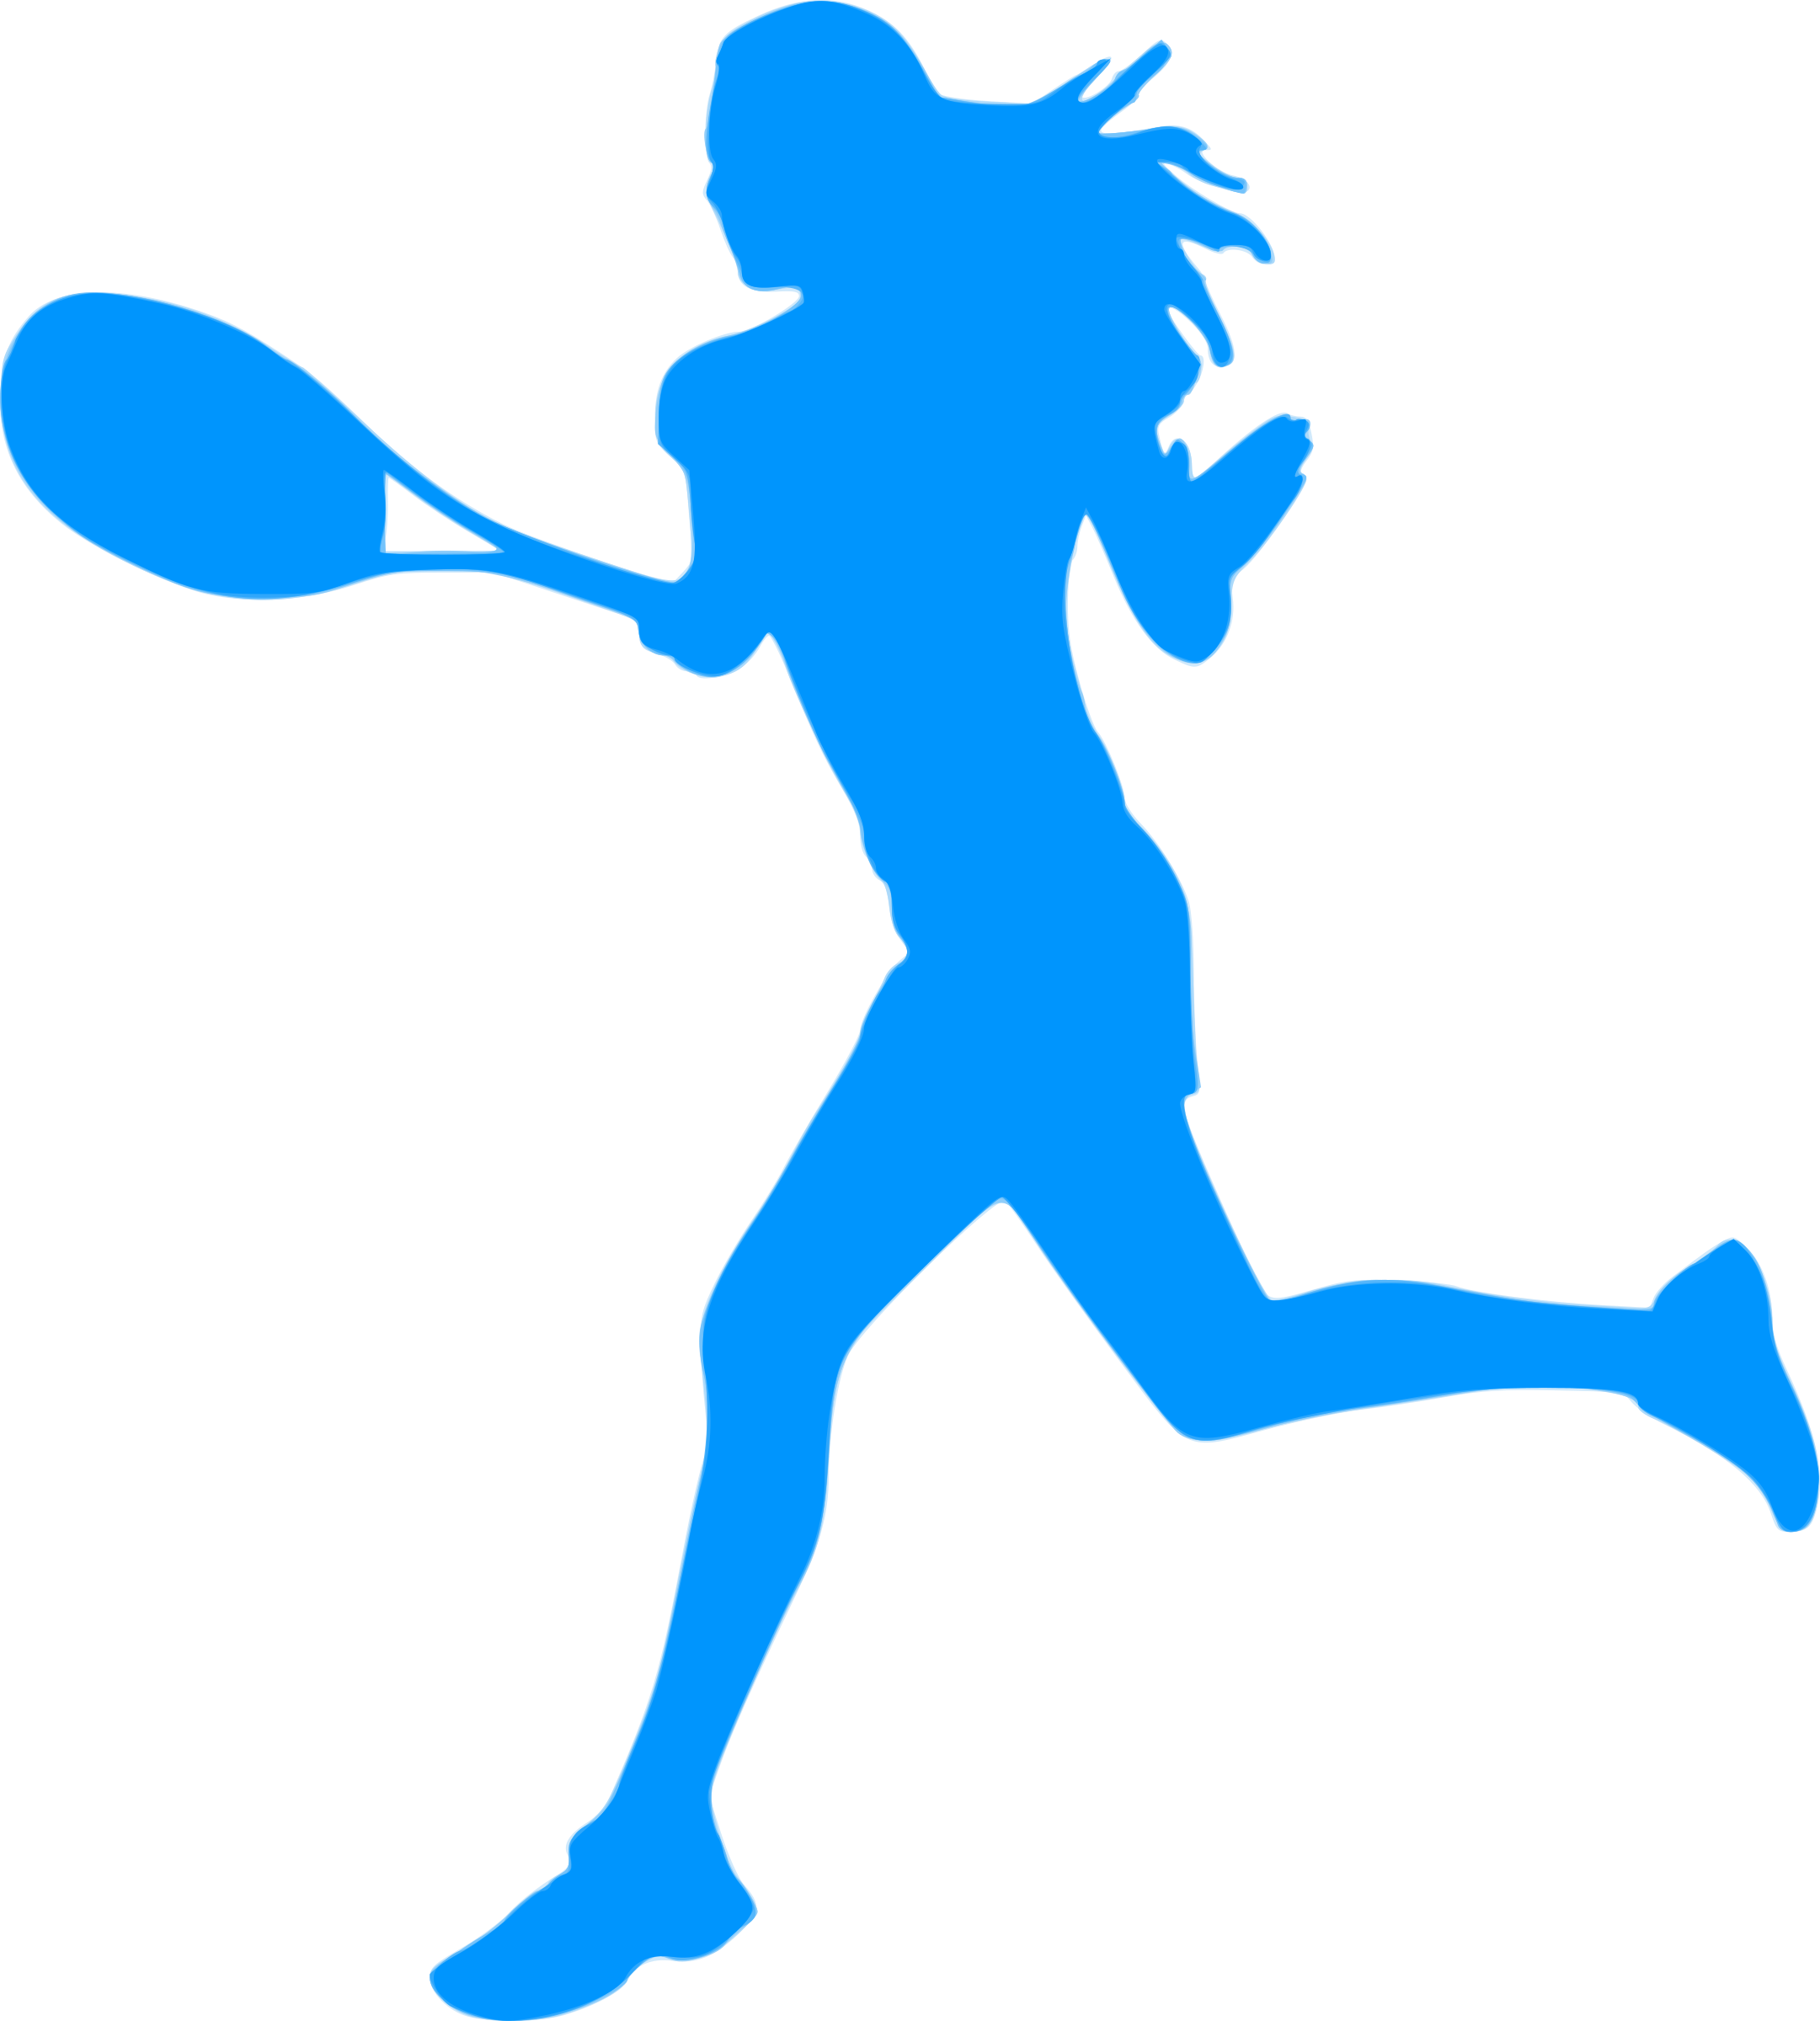 Silhouette Sports 14 Icons Png - Vinyl Wall Decal Sticker Tennis Player Size 84inx72in (2161x2400)